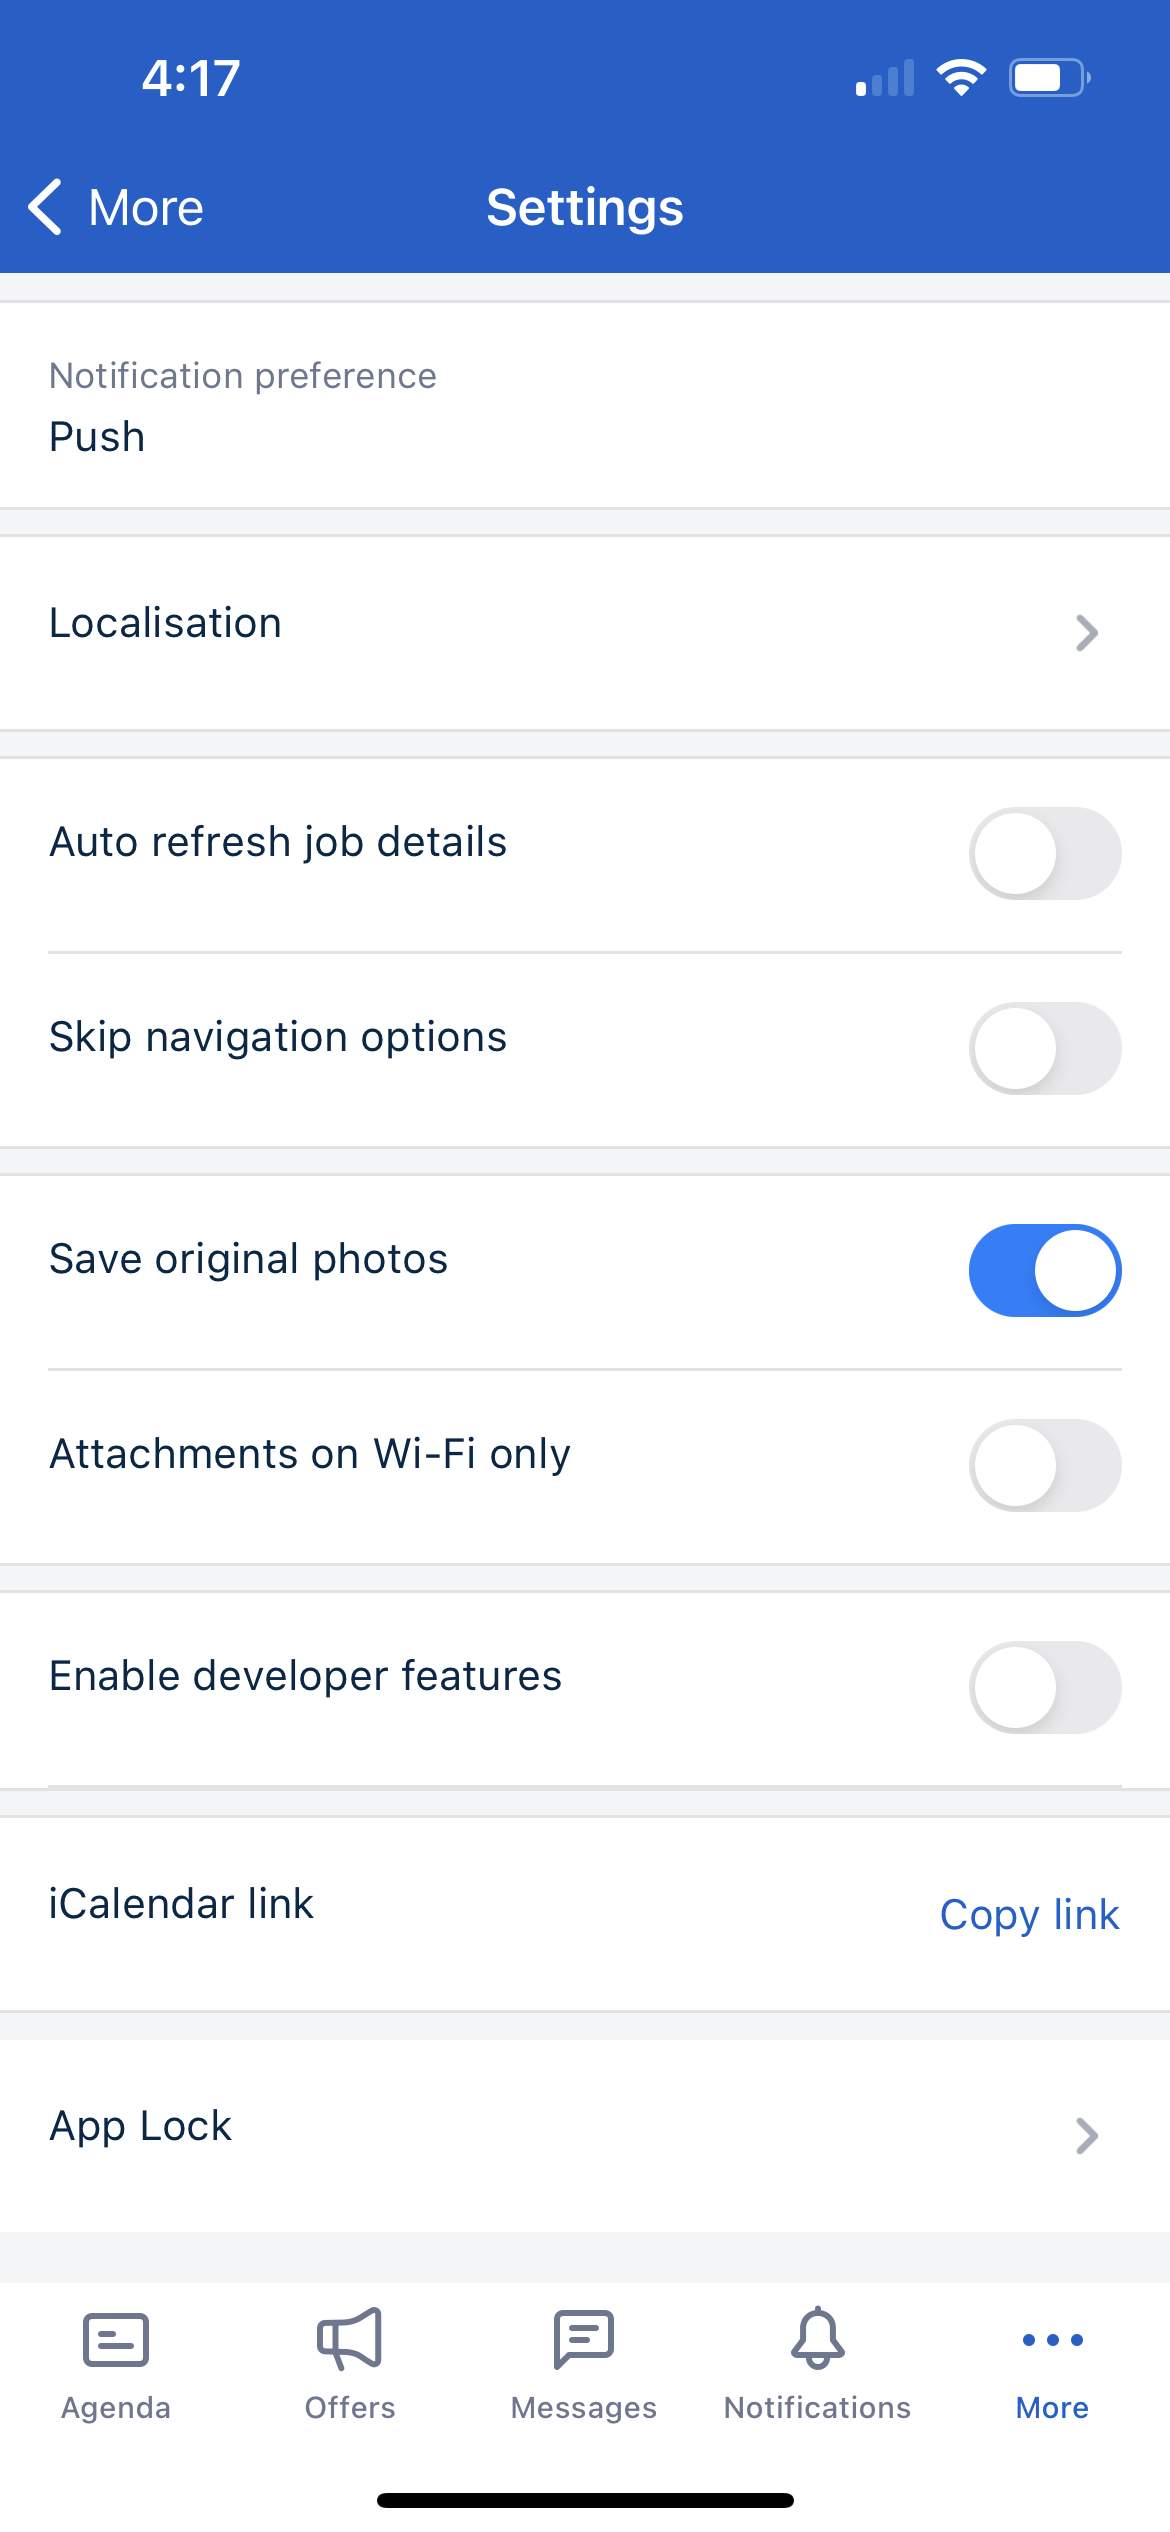 The Skedulo mobile app settings screen with listed options.